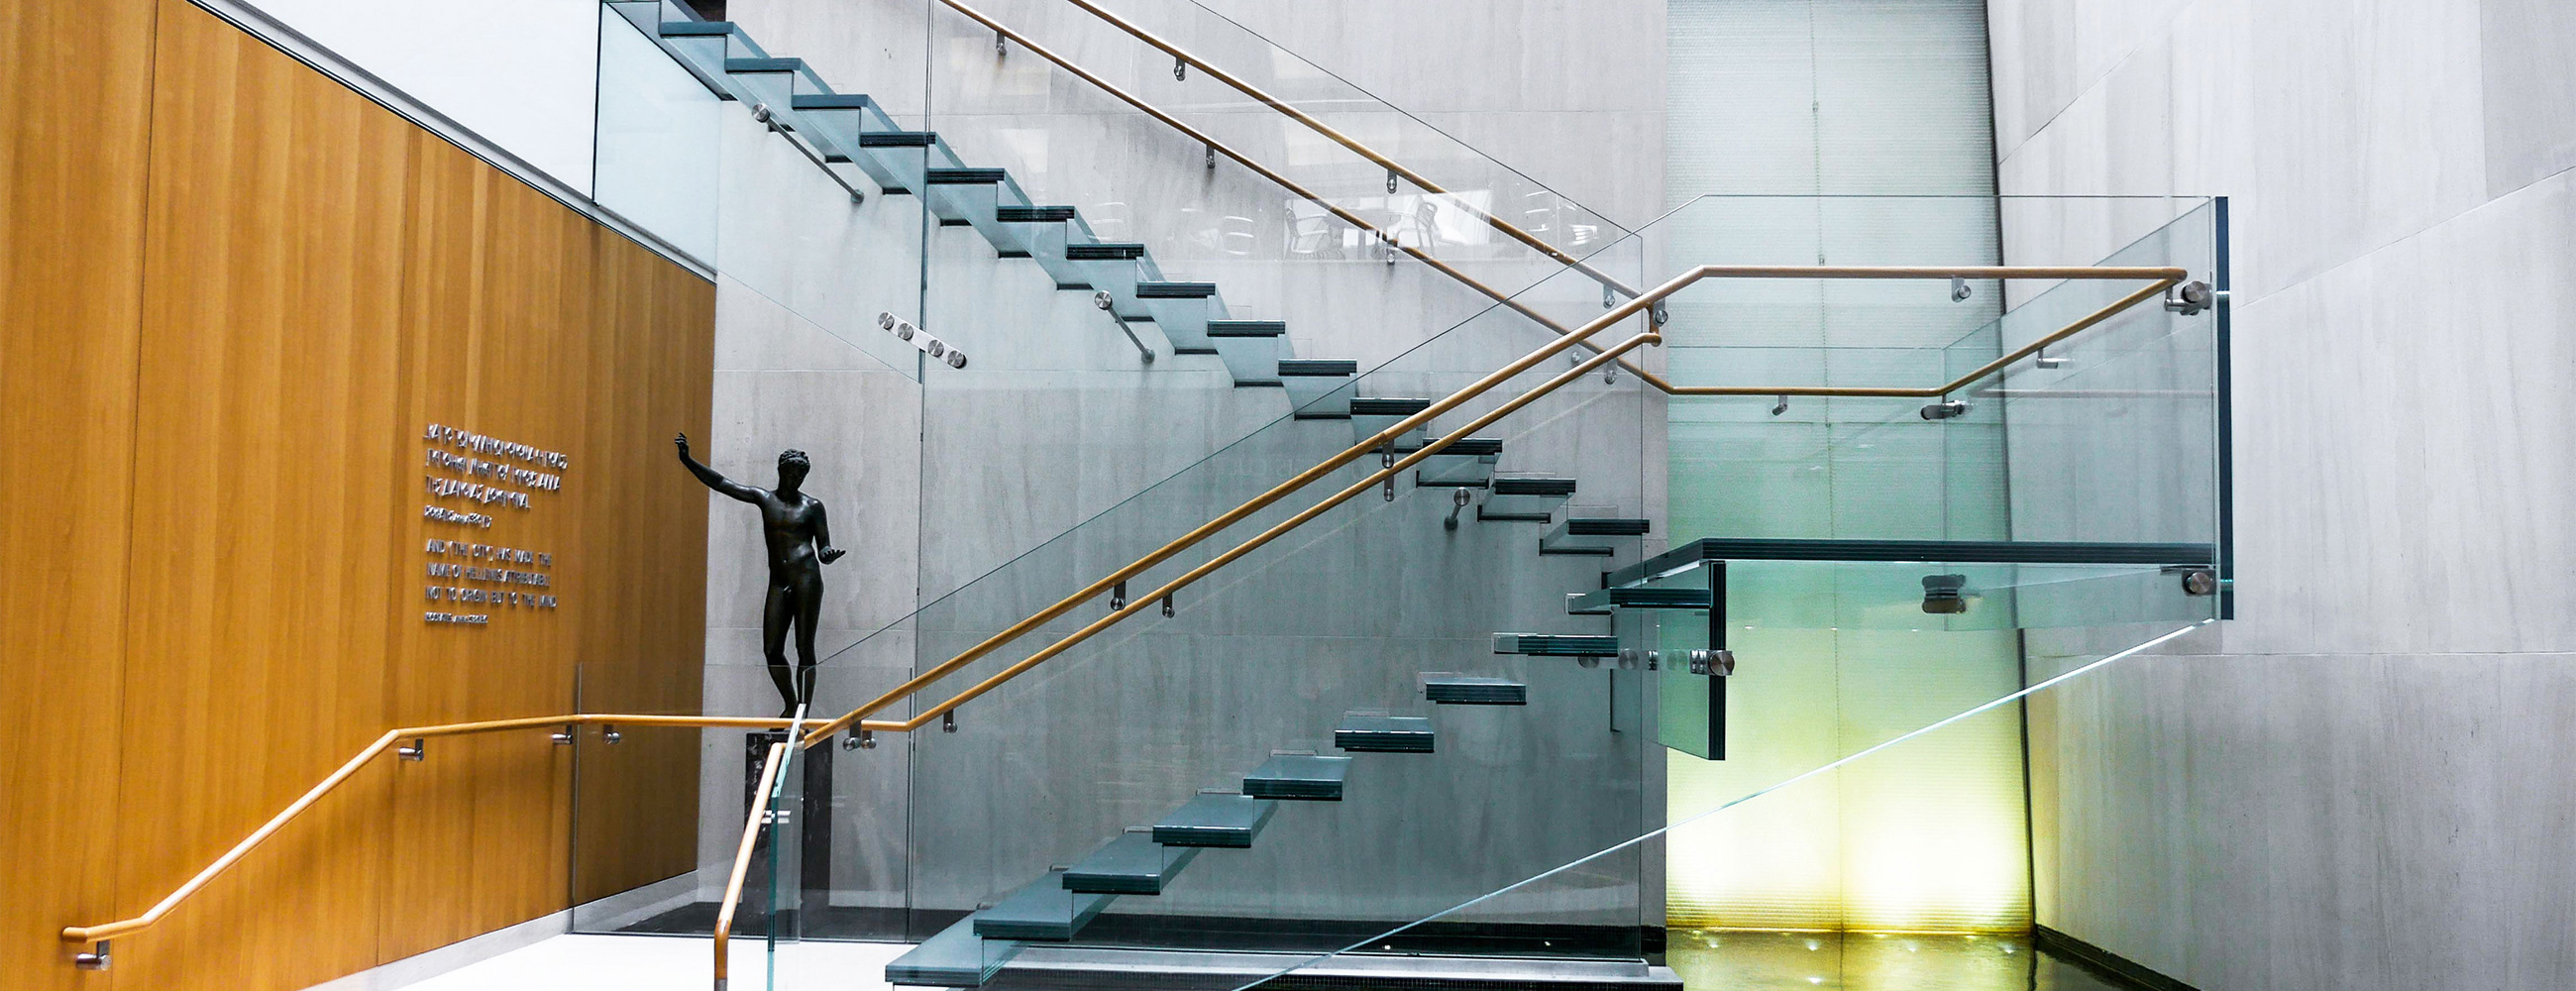 Side view of the all-glass staircase at the Onassis Cultural Center showcasing the stairs, ballustrades and railing.